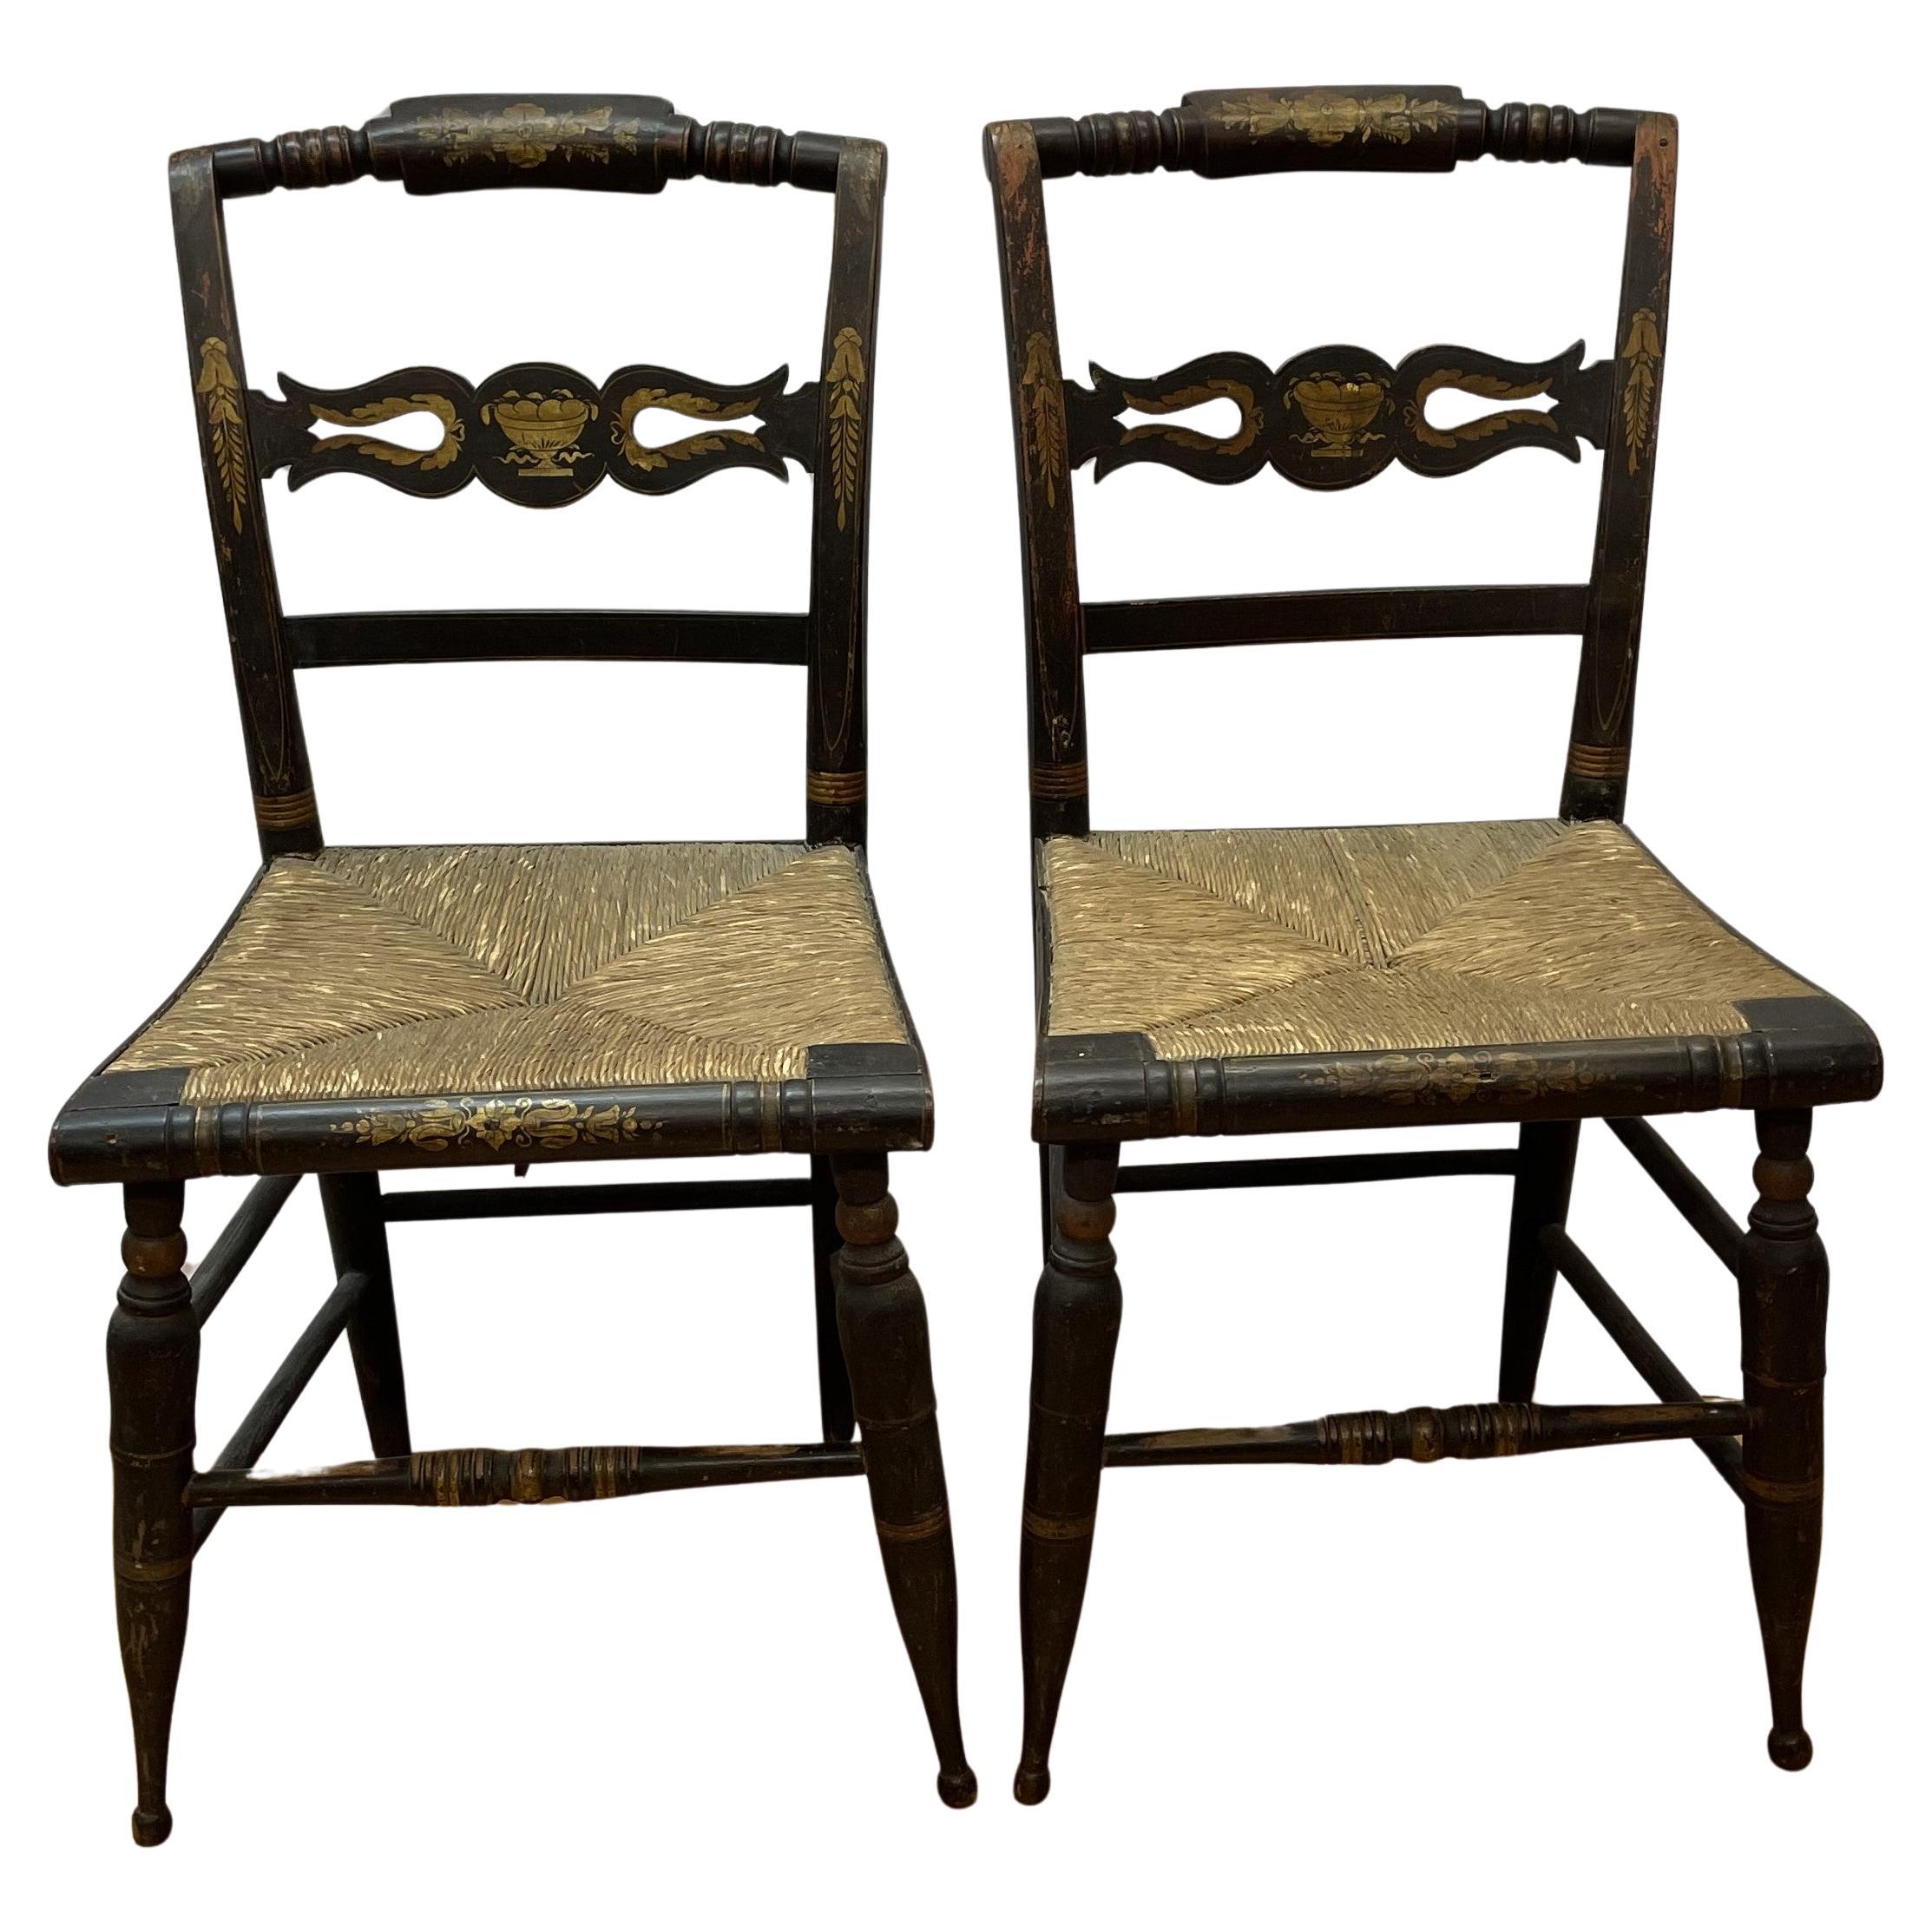 Pair of Sheraton fancy early 19th century hitchcock chains with rush seats For Sale